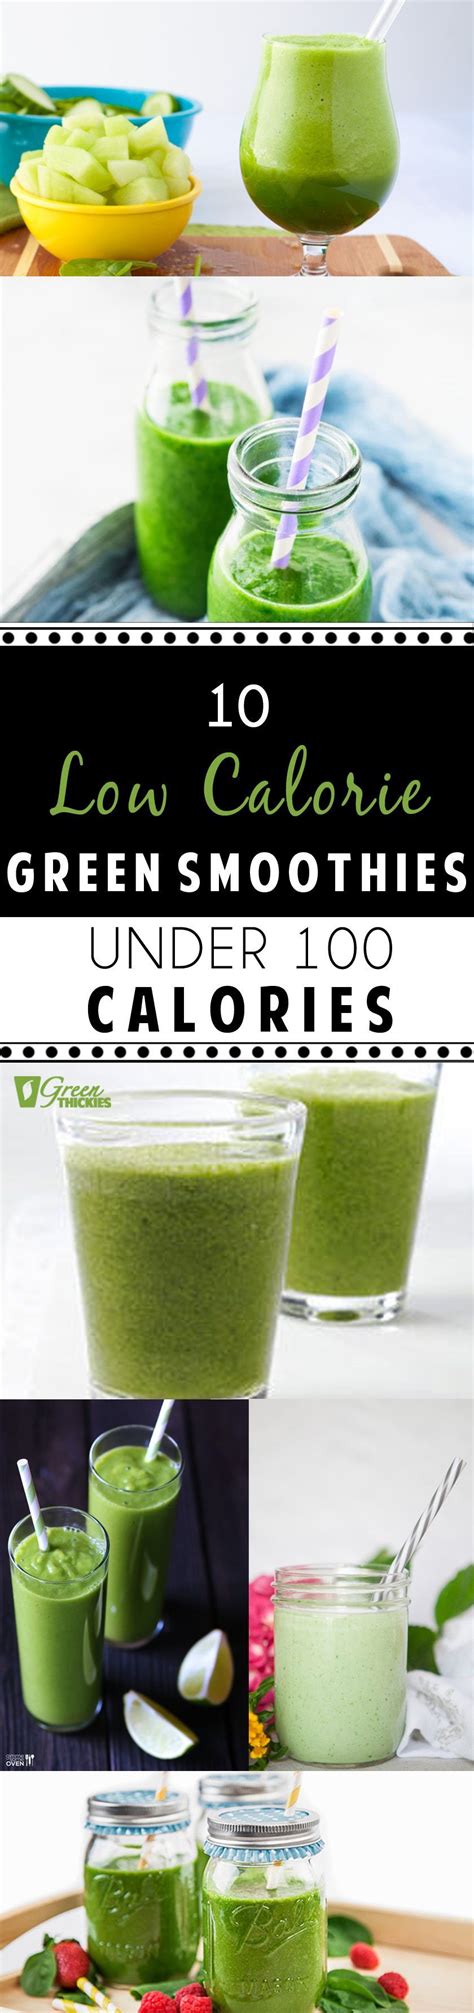 Using water or tea instead of juice or milk is a great way to easily cut out over 100 calories. 10 Low Calorie Green Smoothies Under 100 Calories | Juice ...